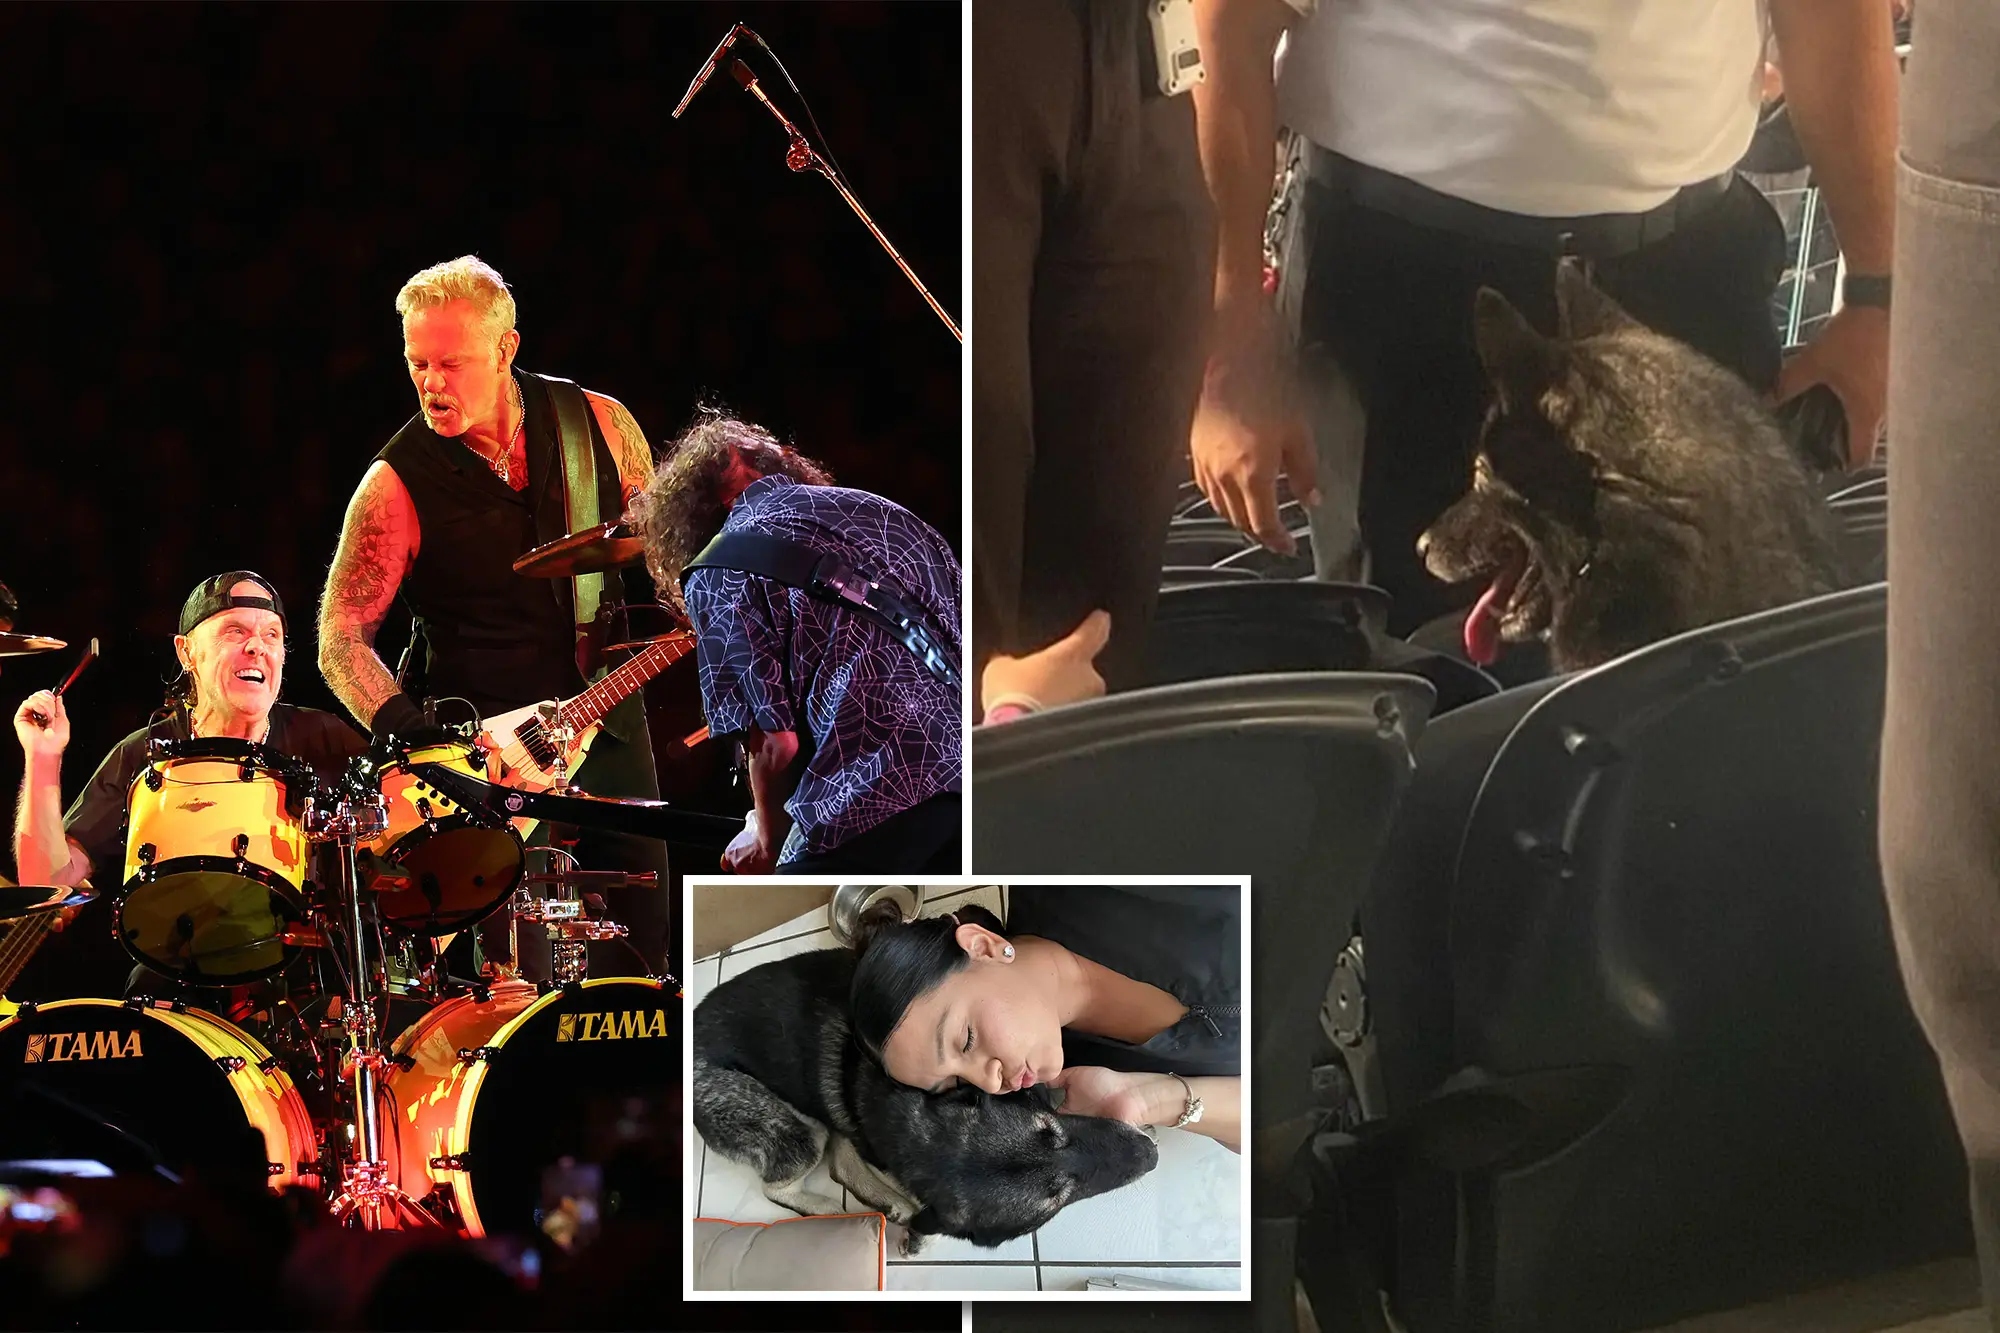 Dog Leaves Owner's Home And Is Spotted Sitting In Metallica Concert